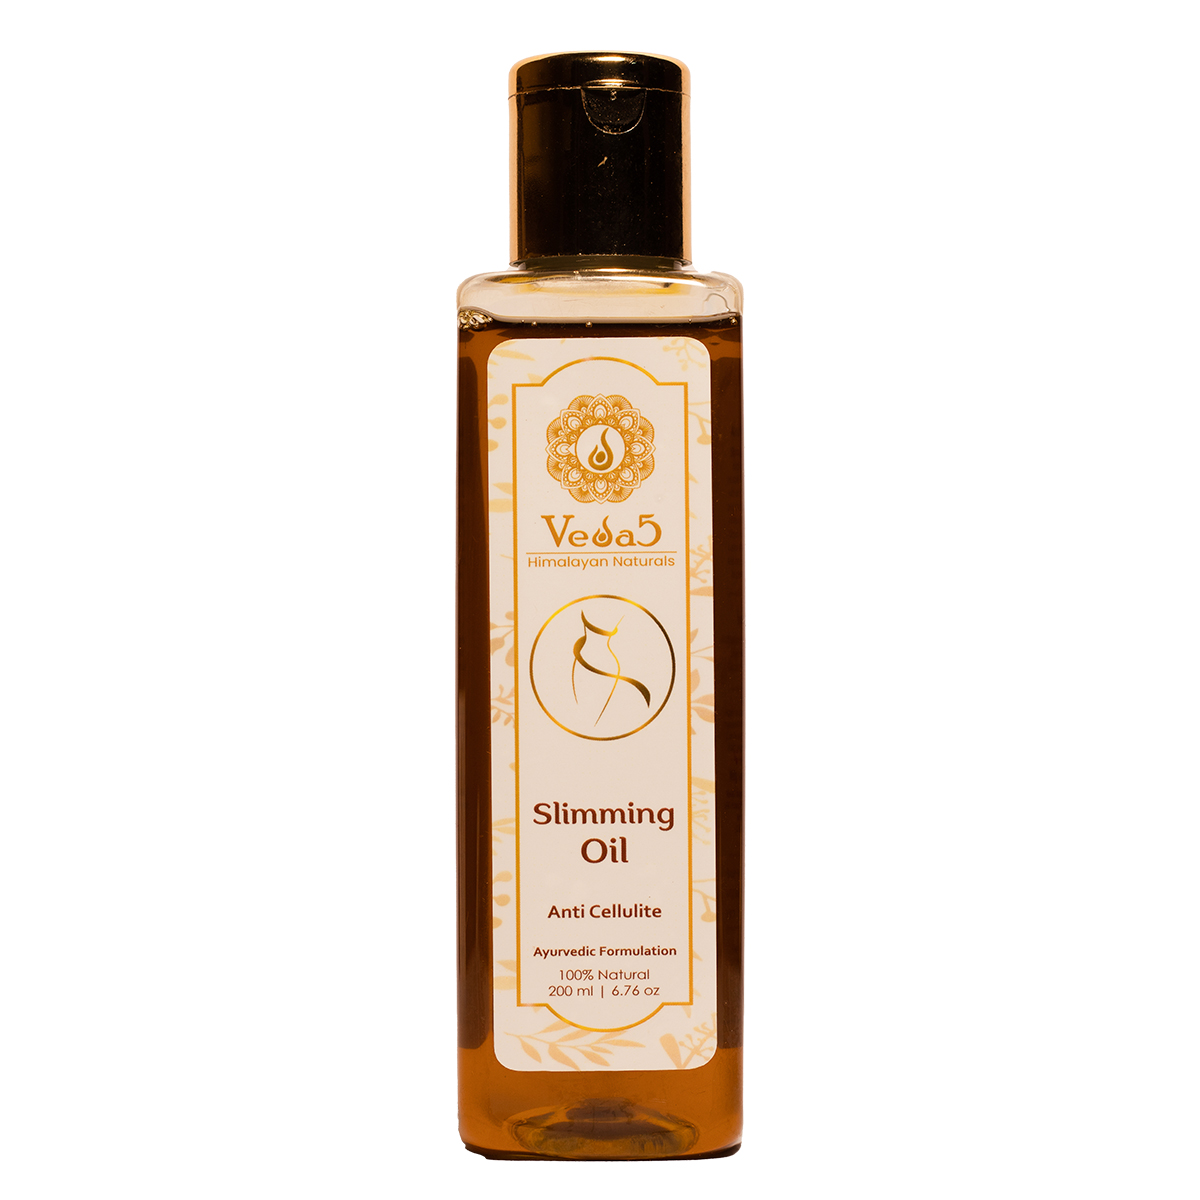 Slimming Oil by Veda5 Himalayan Naturals 1